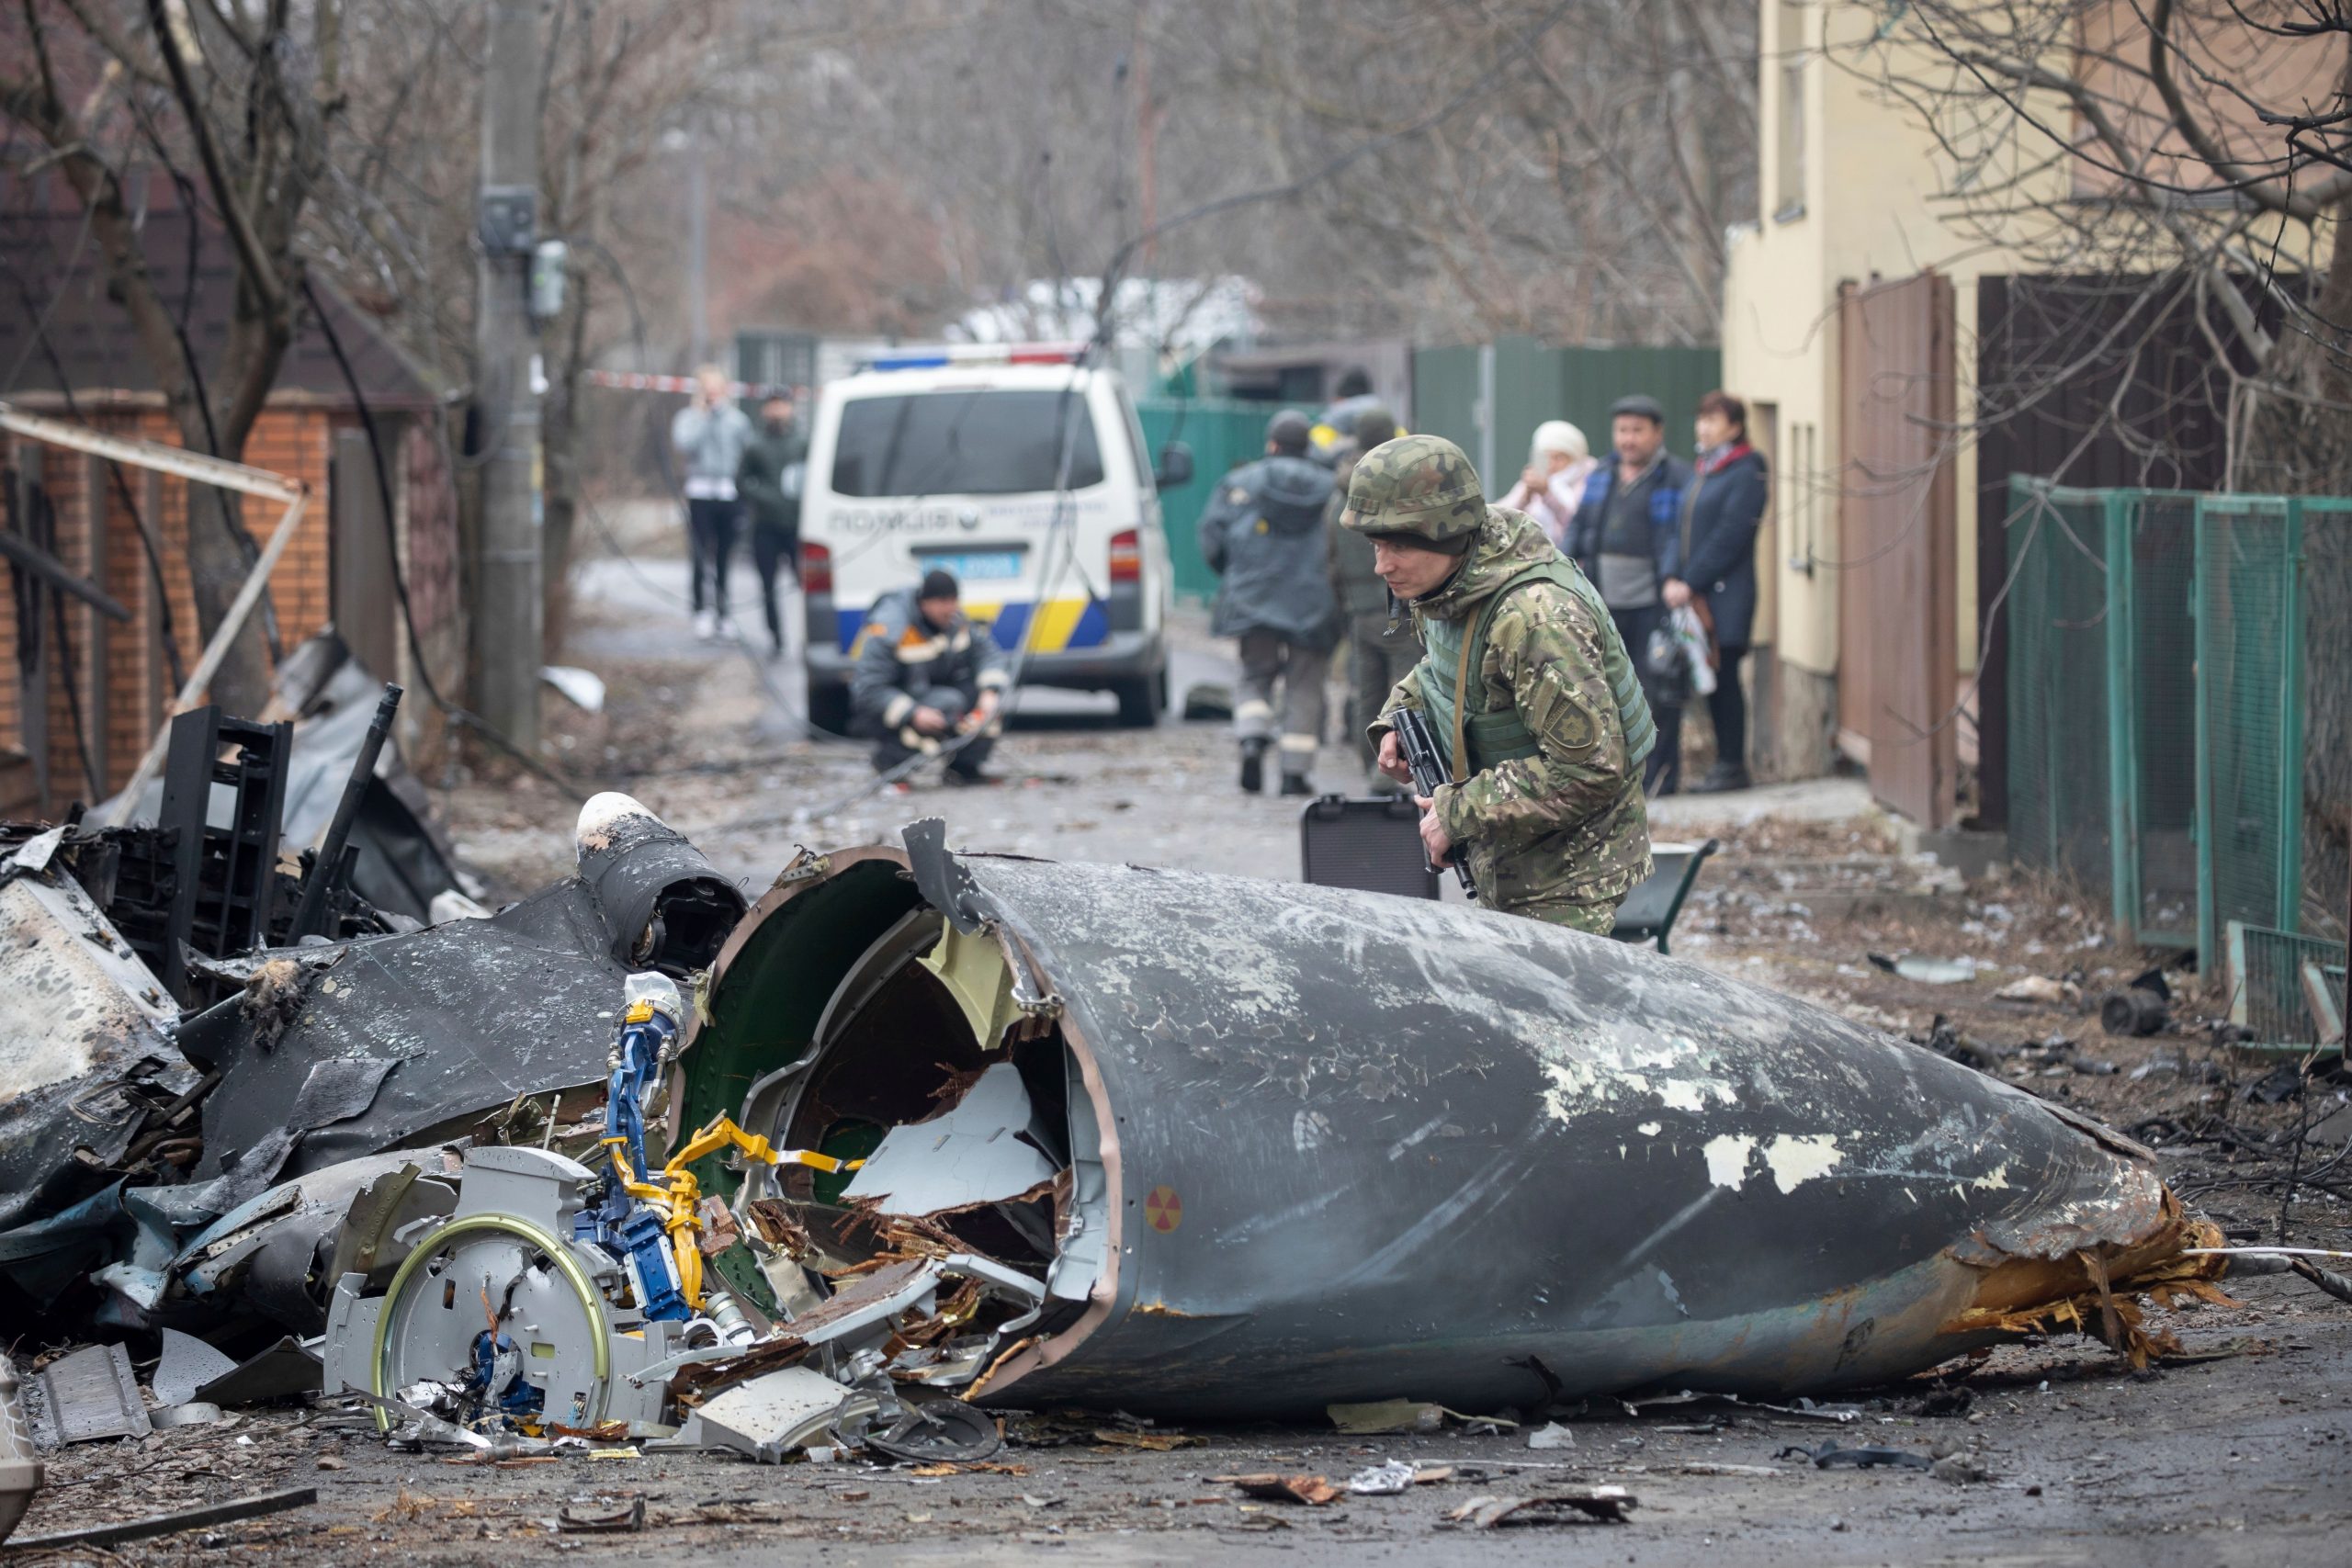 Russia-Ukraine crisis: Russian offensive against Ukraine has slowed, says military officials